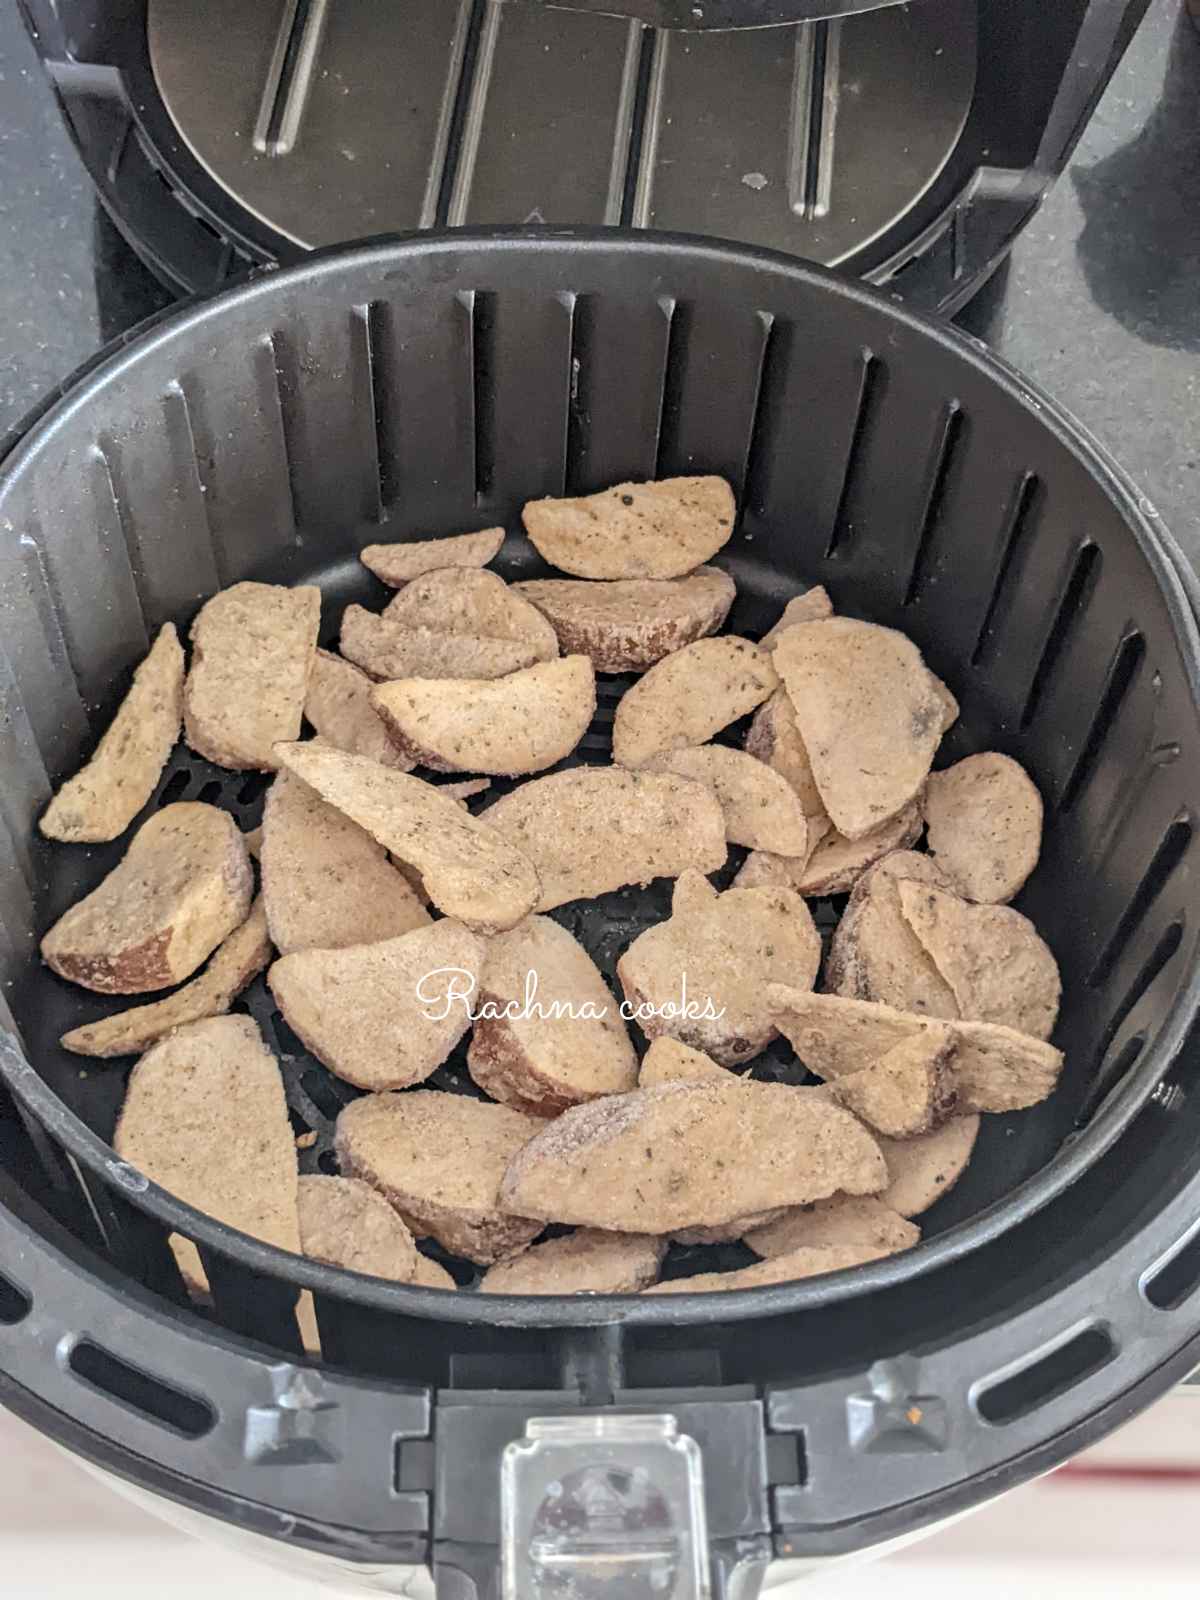 Frozen wedges being cooked in air fryer basket